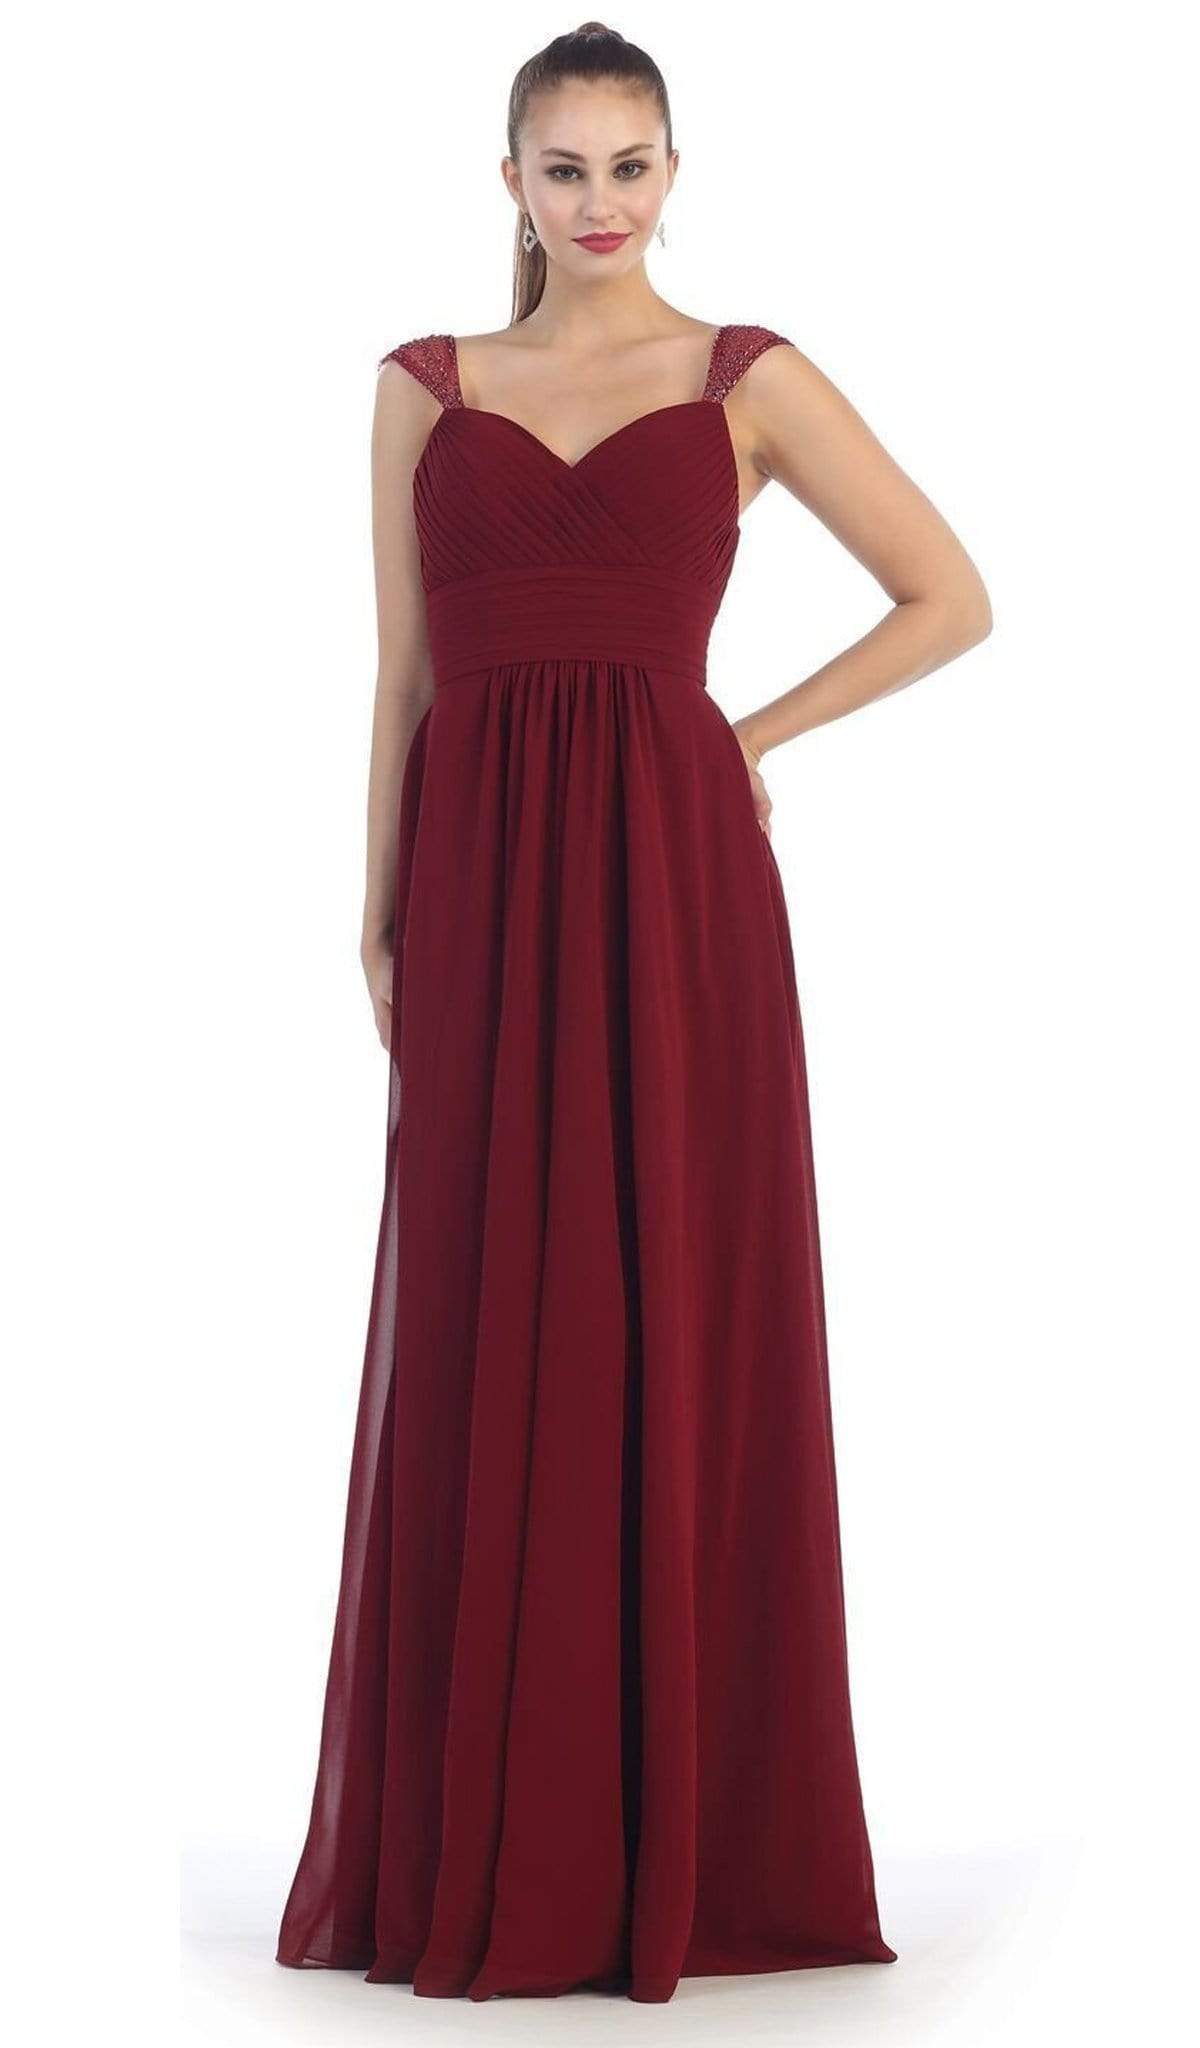 May Queen - MQ1275B Pleated Sweetheart A-line Evening Dress Bridesmaid Dresses 22 / Burgundy